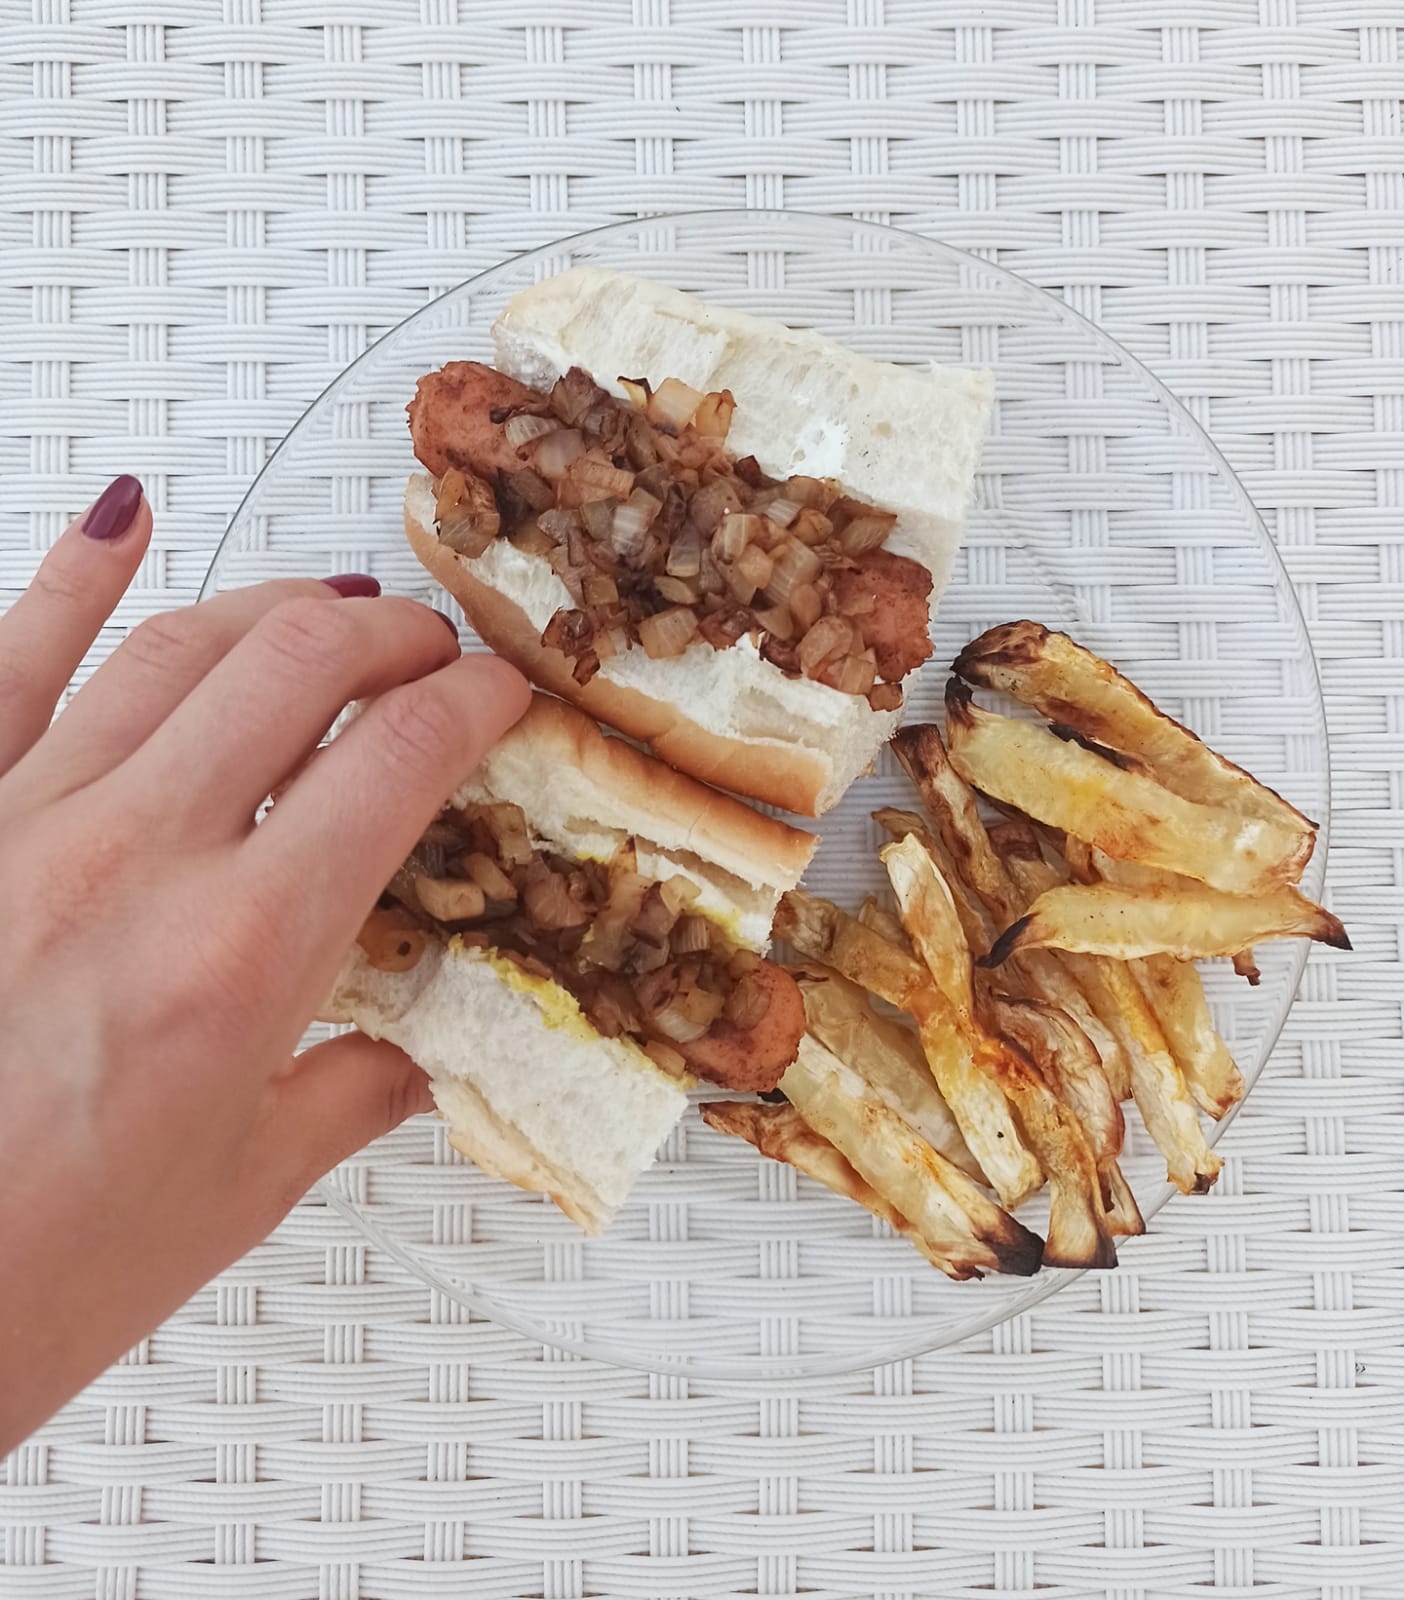 American-style hot dogs with celery root fries